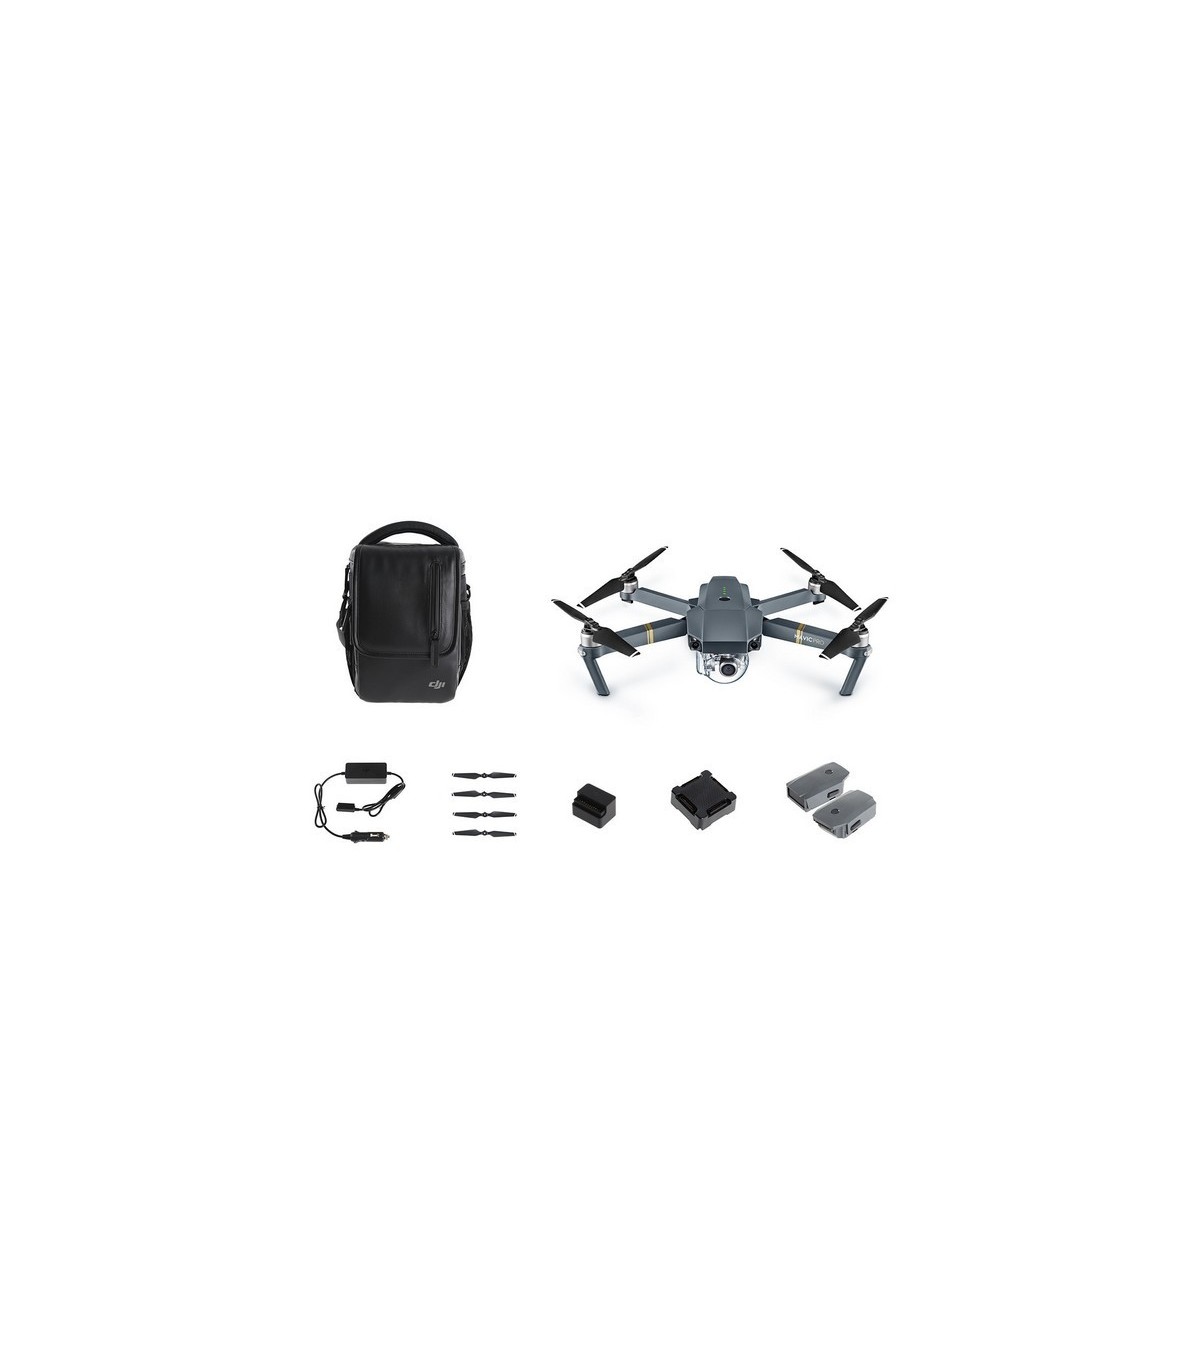 DJI Mavic Mini avec fly more combo - 3 batteries, sacoche, helices,  chargeur, ca